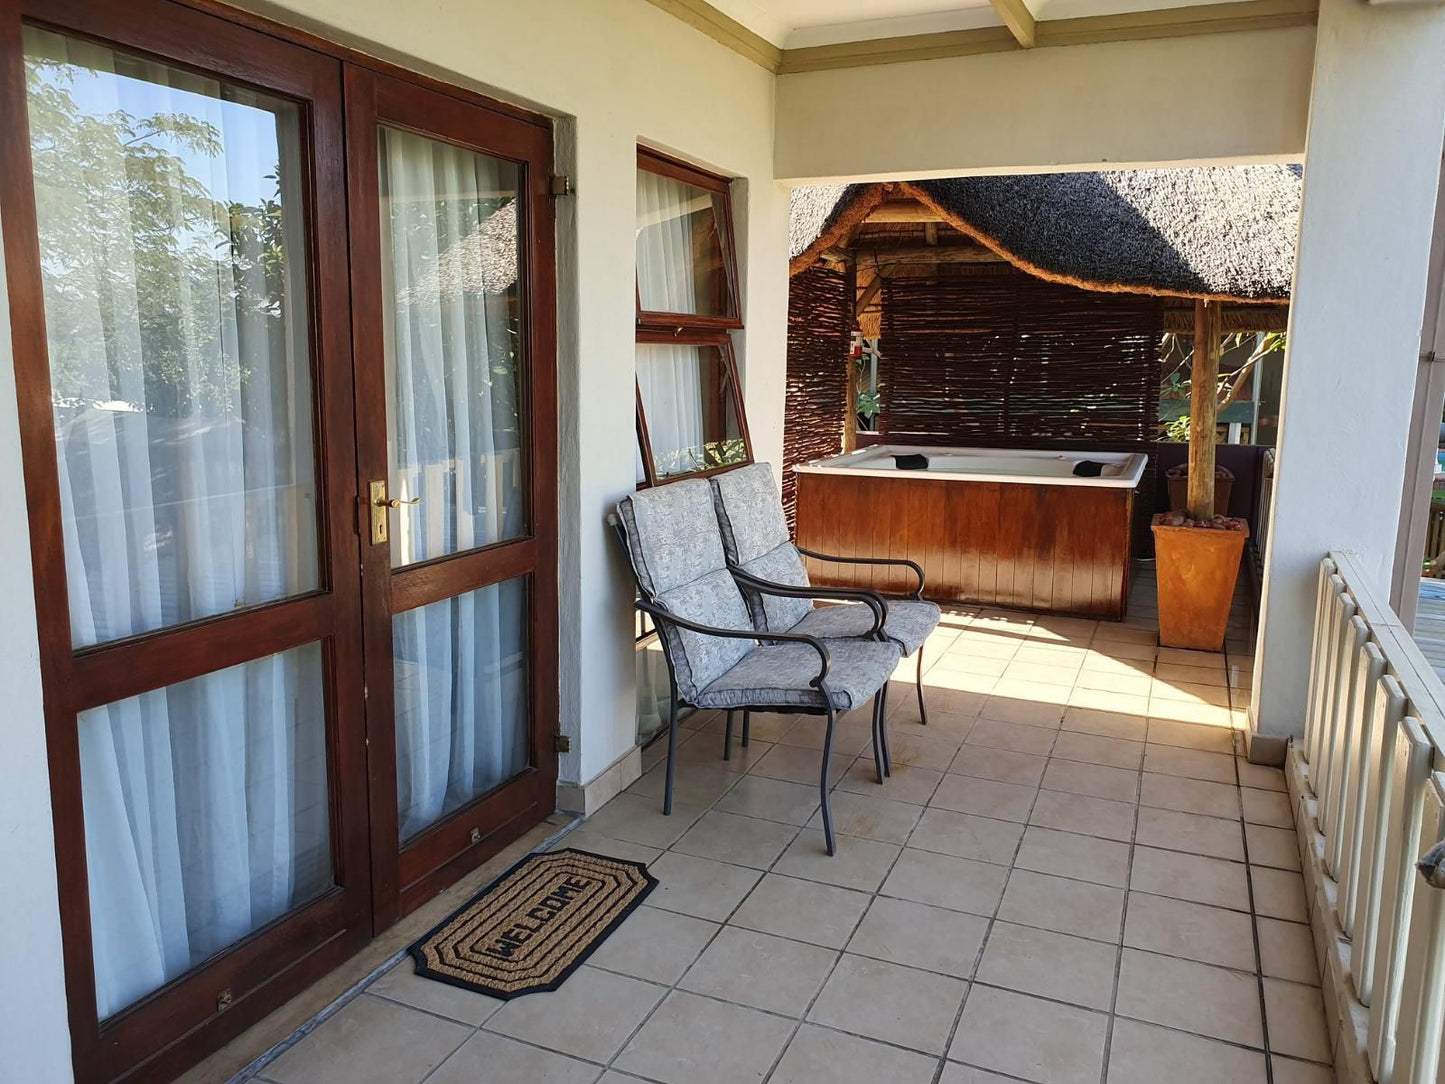 Watershed Guest House Kosmos Hartbeespoort North West Province South Africa 